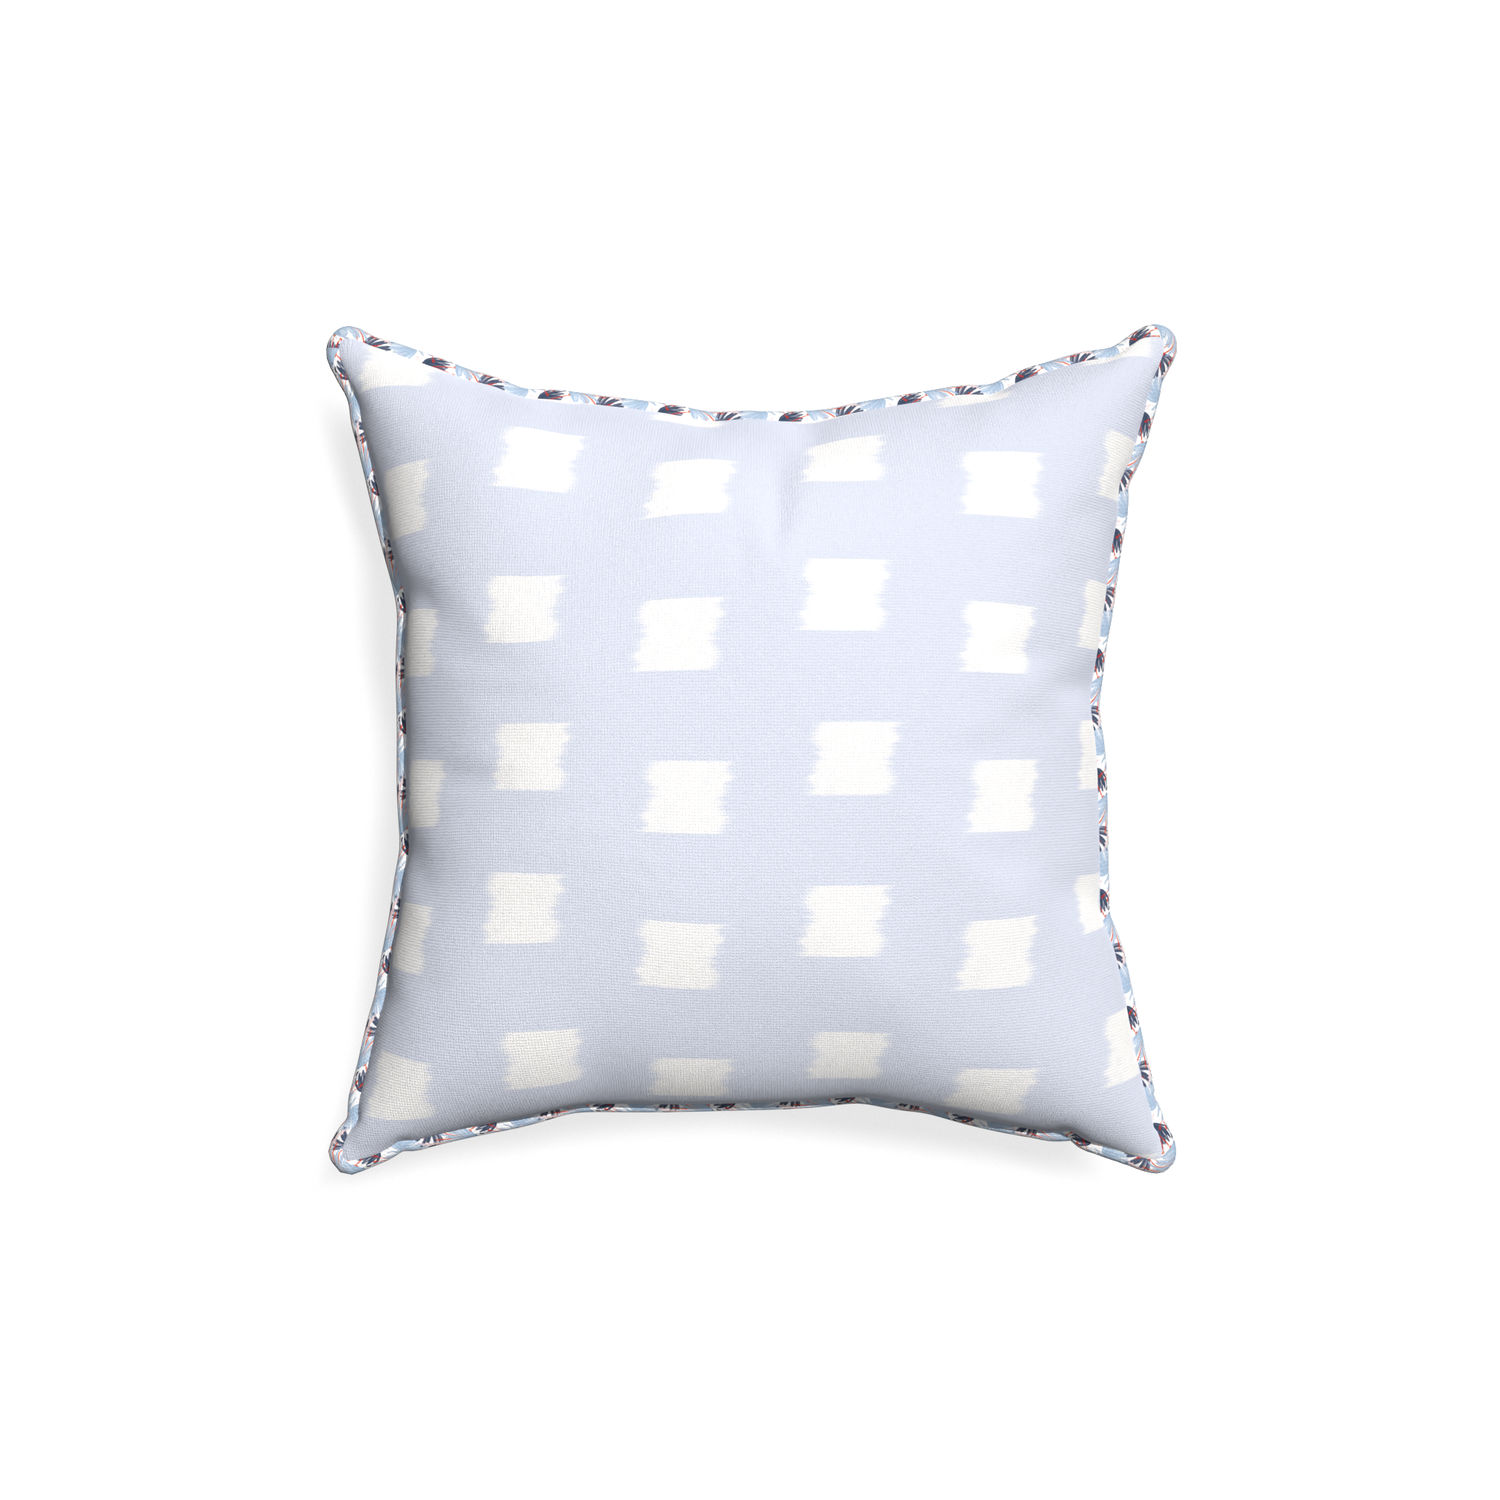 18-square denton custom pillow with e piping on white background